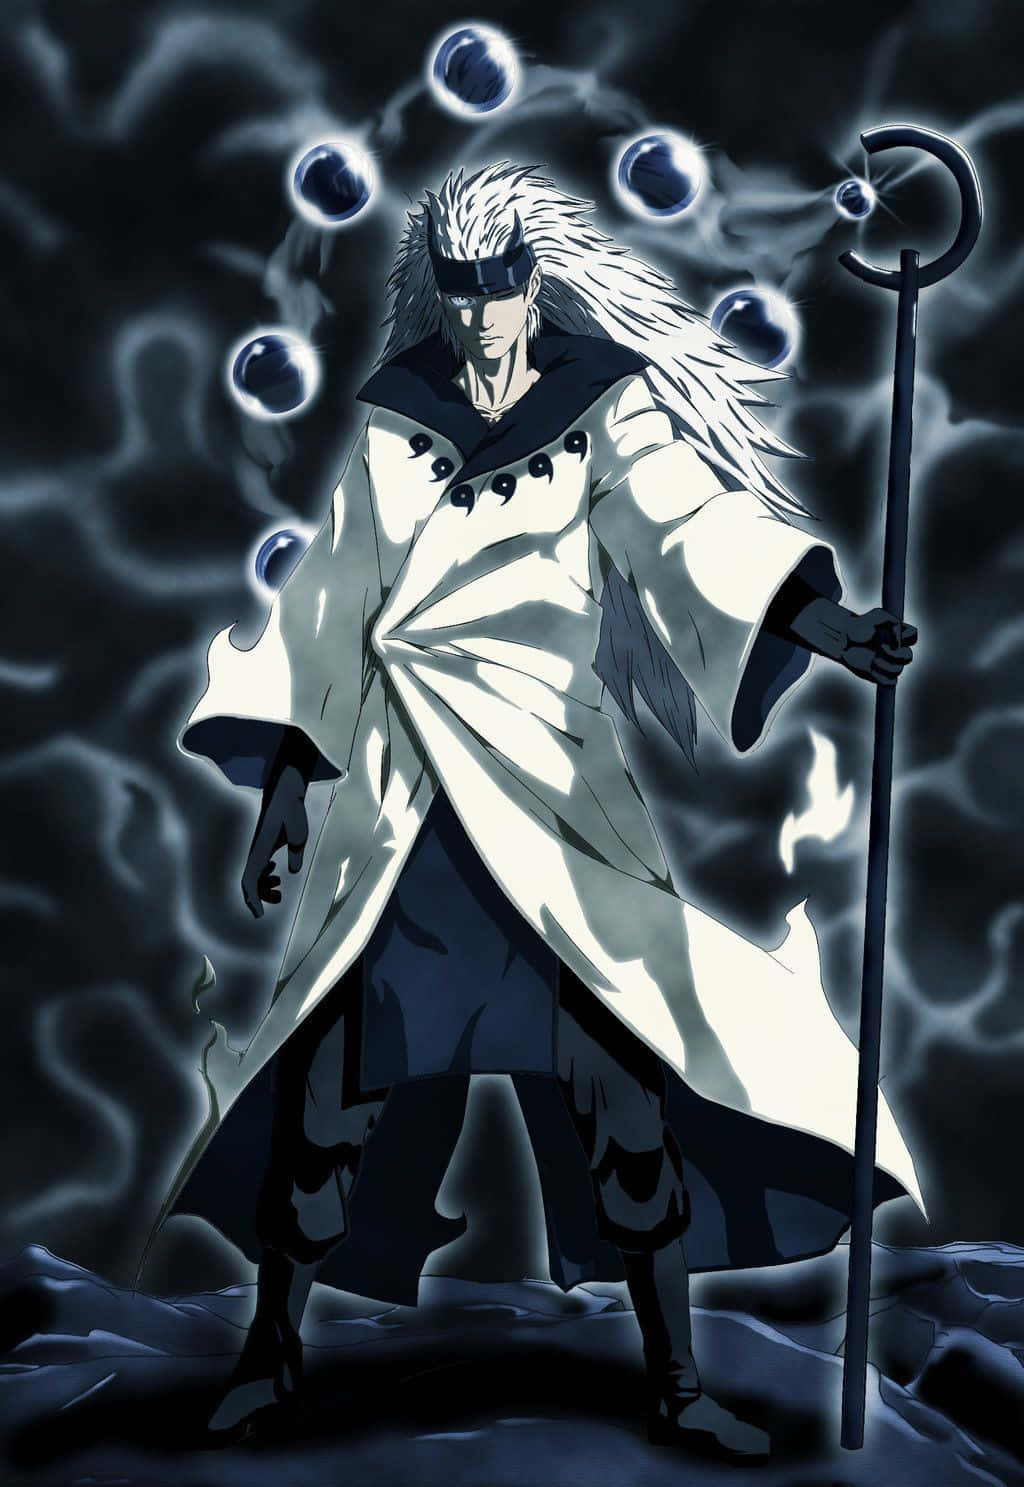 The Sage of Six Paths - The Legendary Figure in the Ninja World Wallpaper